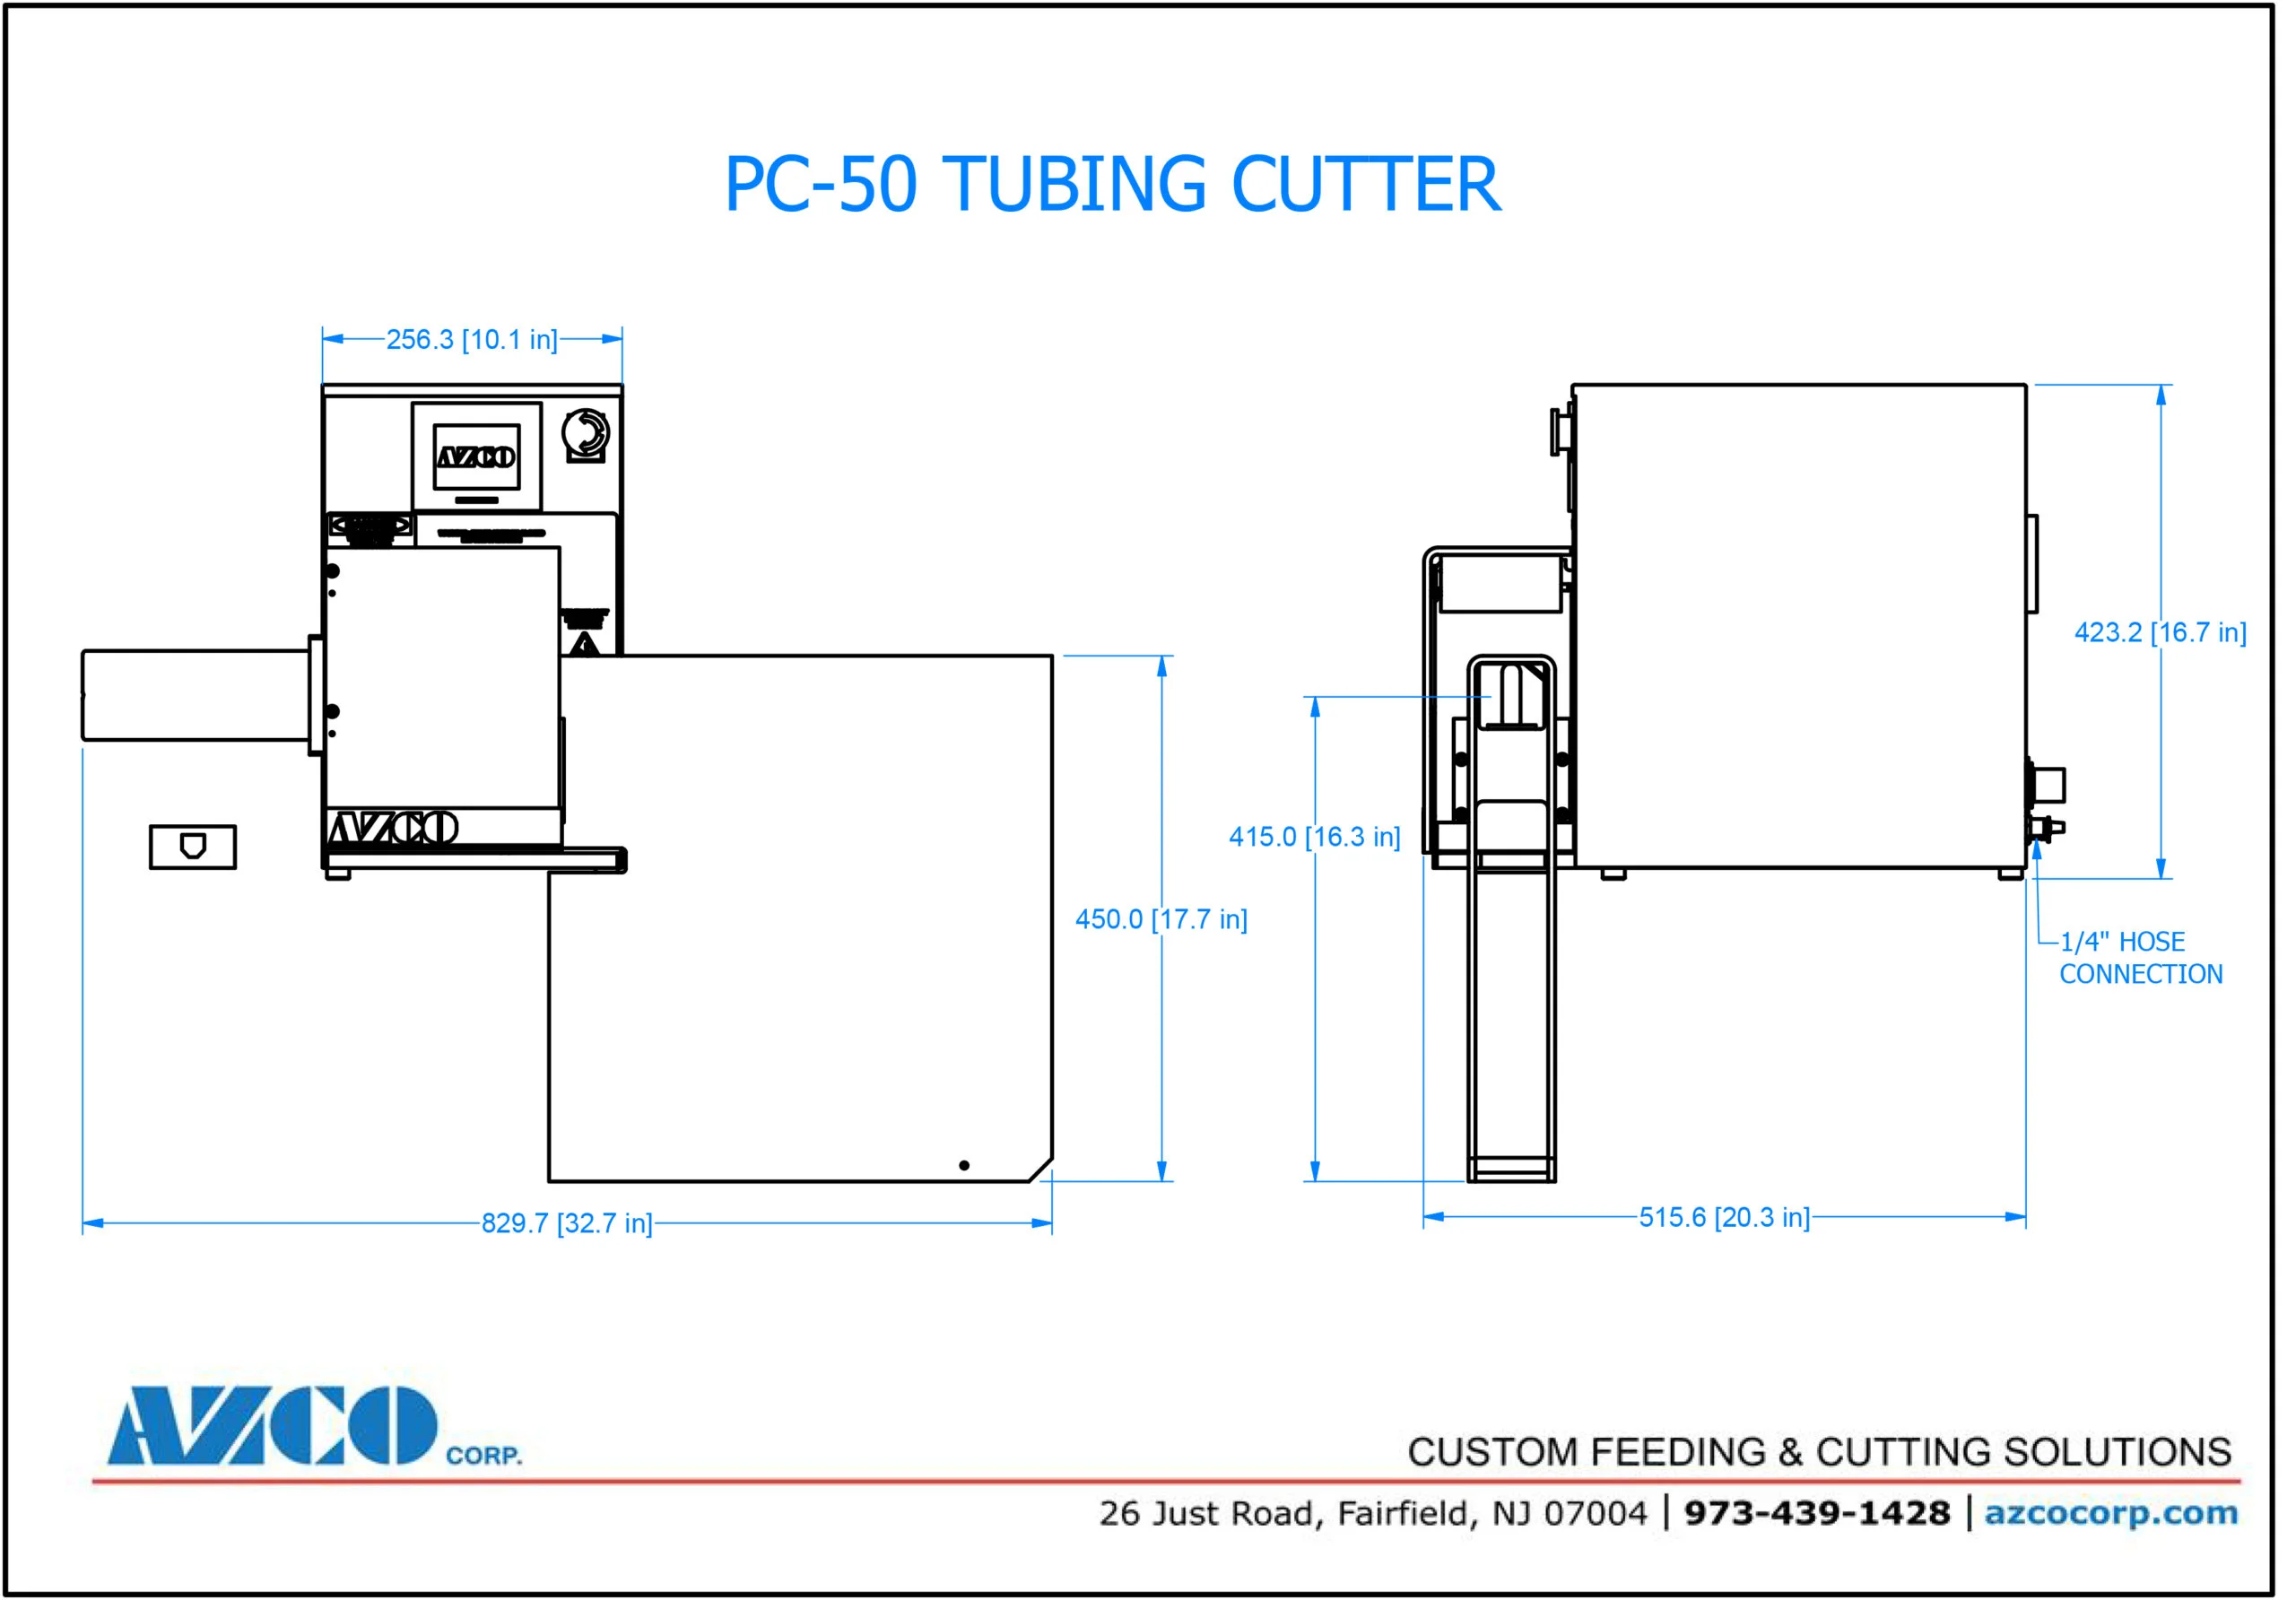 PC-50 Tubing Cutter Product Drawing